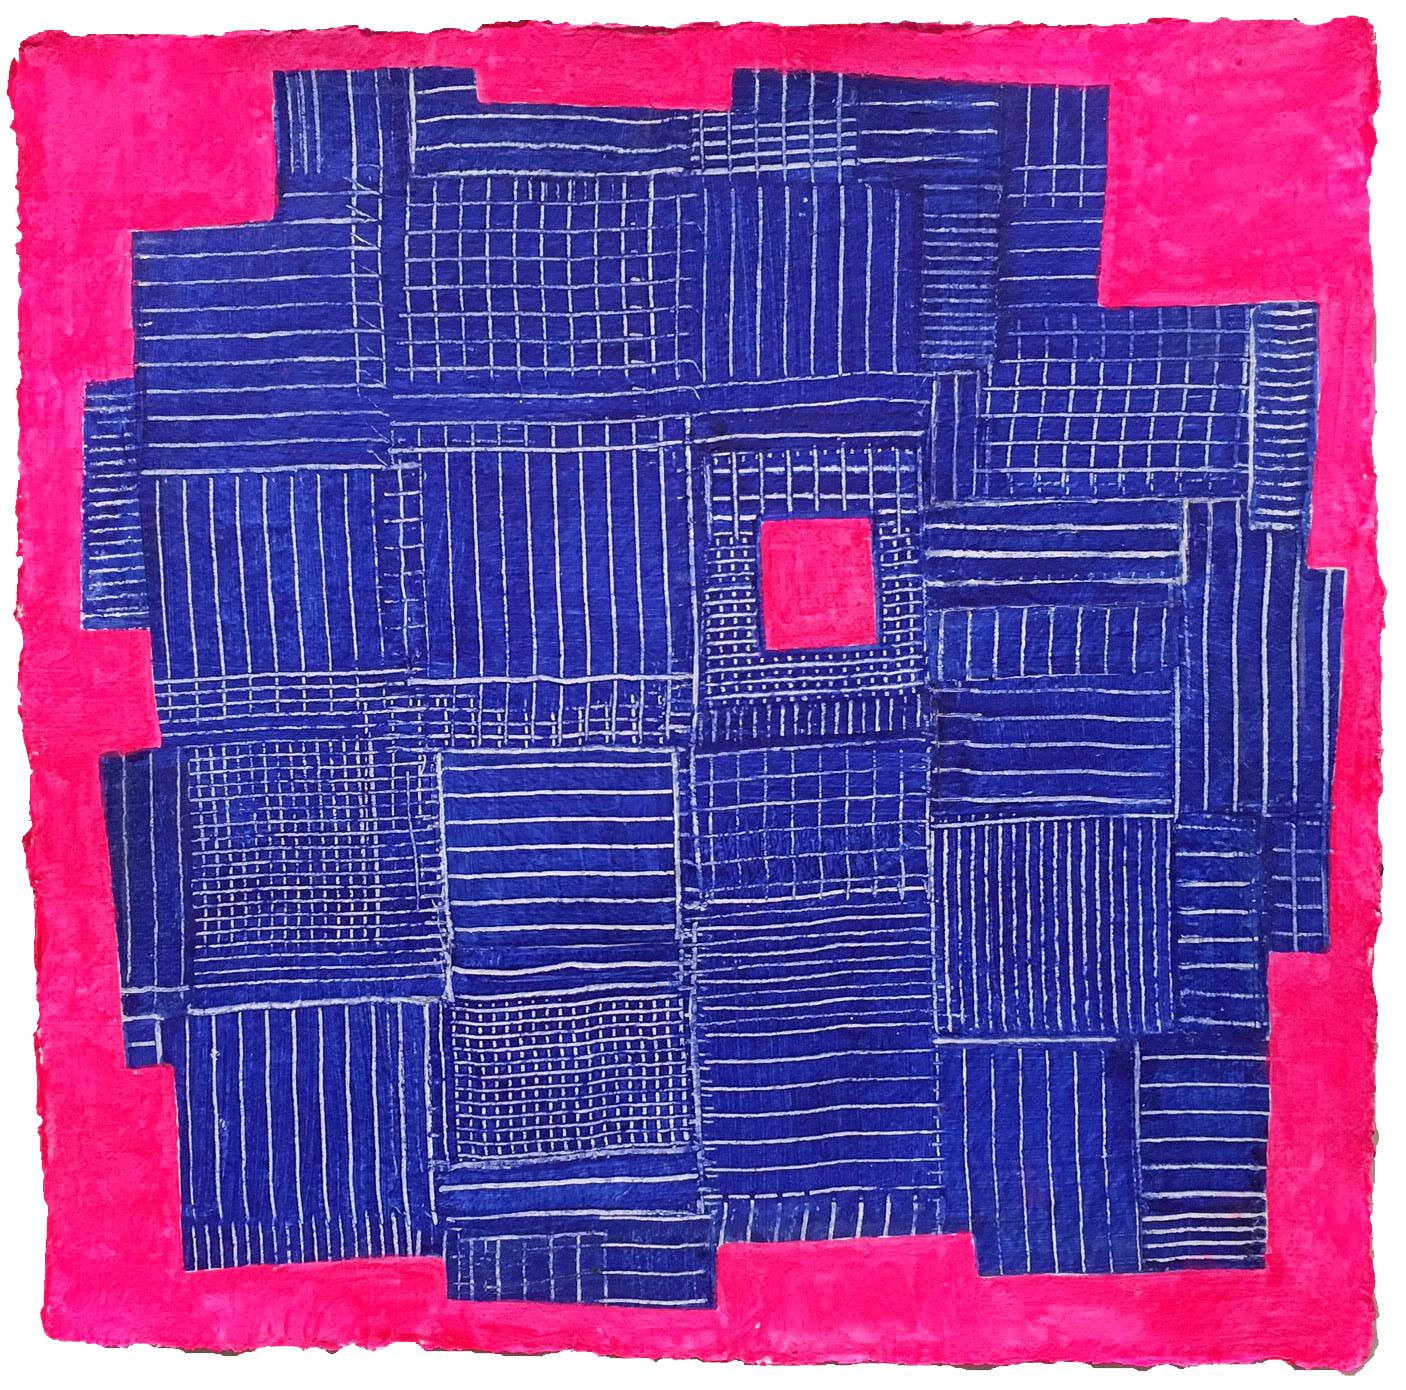 Andra Samelson, Red Square,  Acrylic on paper, 12 x 12 inches, 2018 For Sale 1